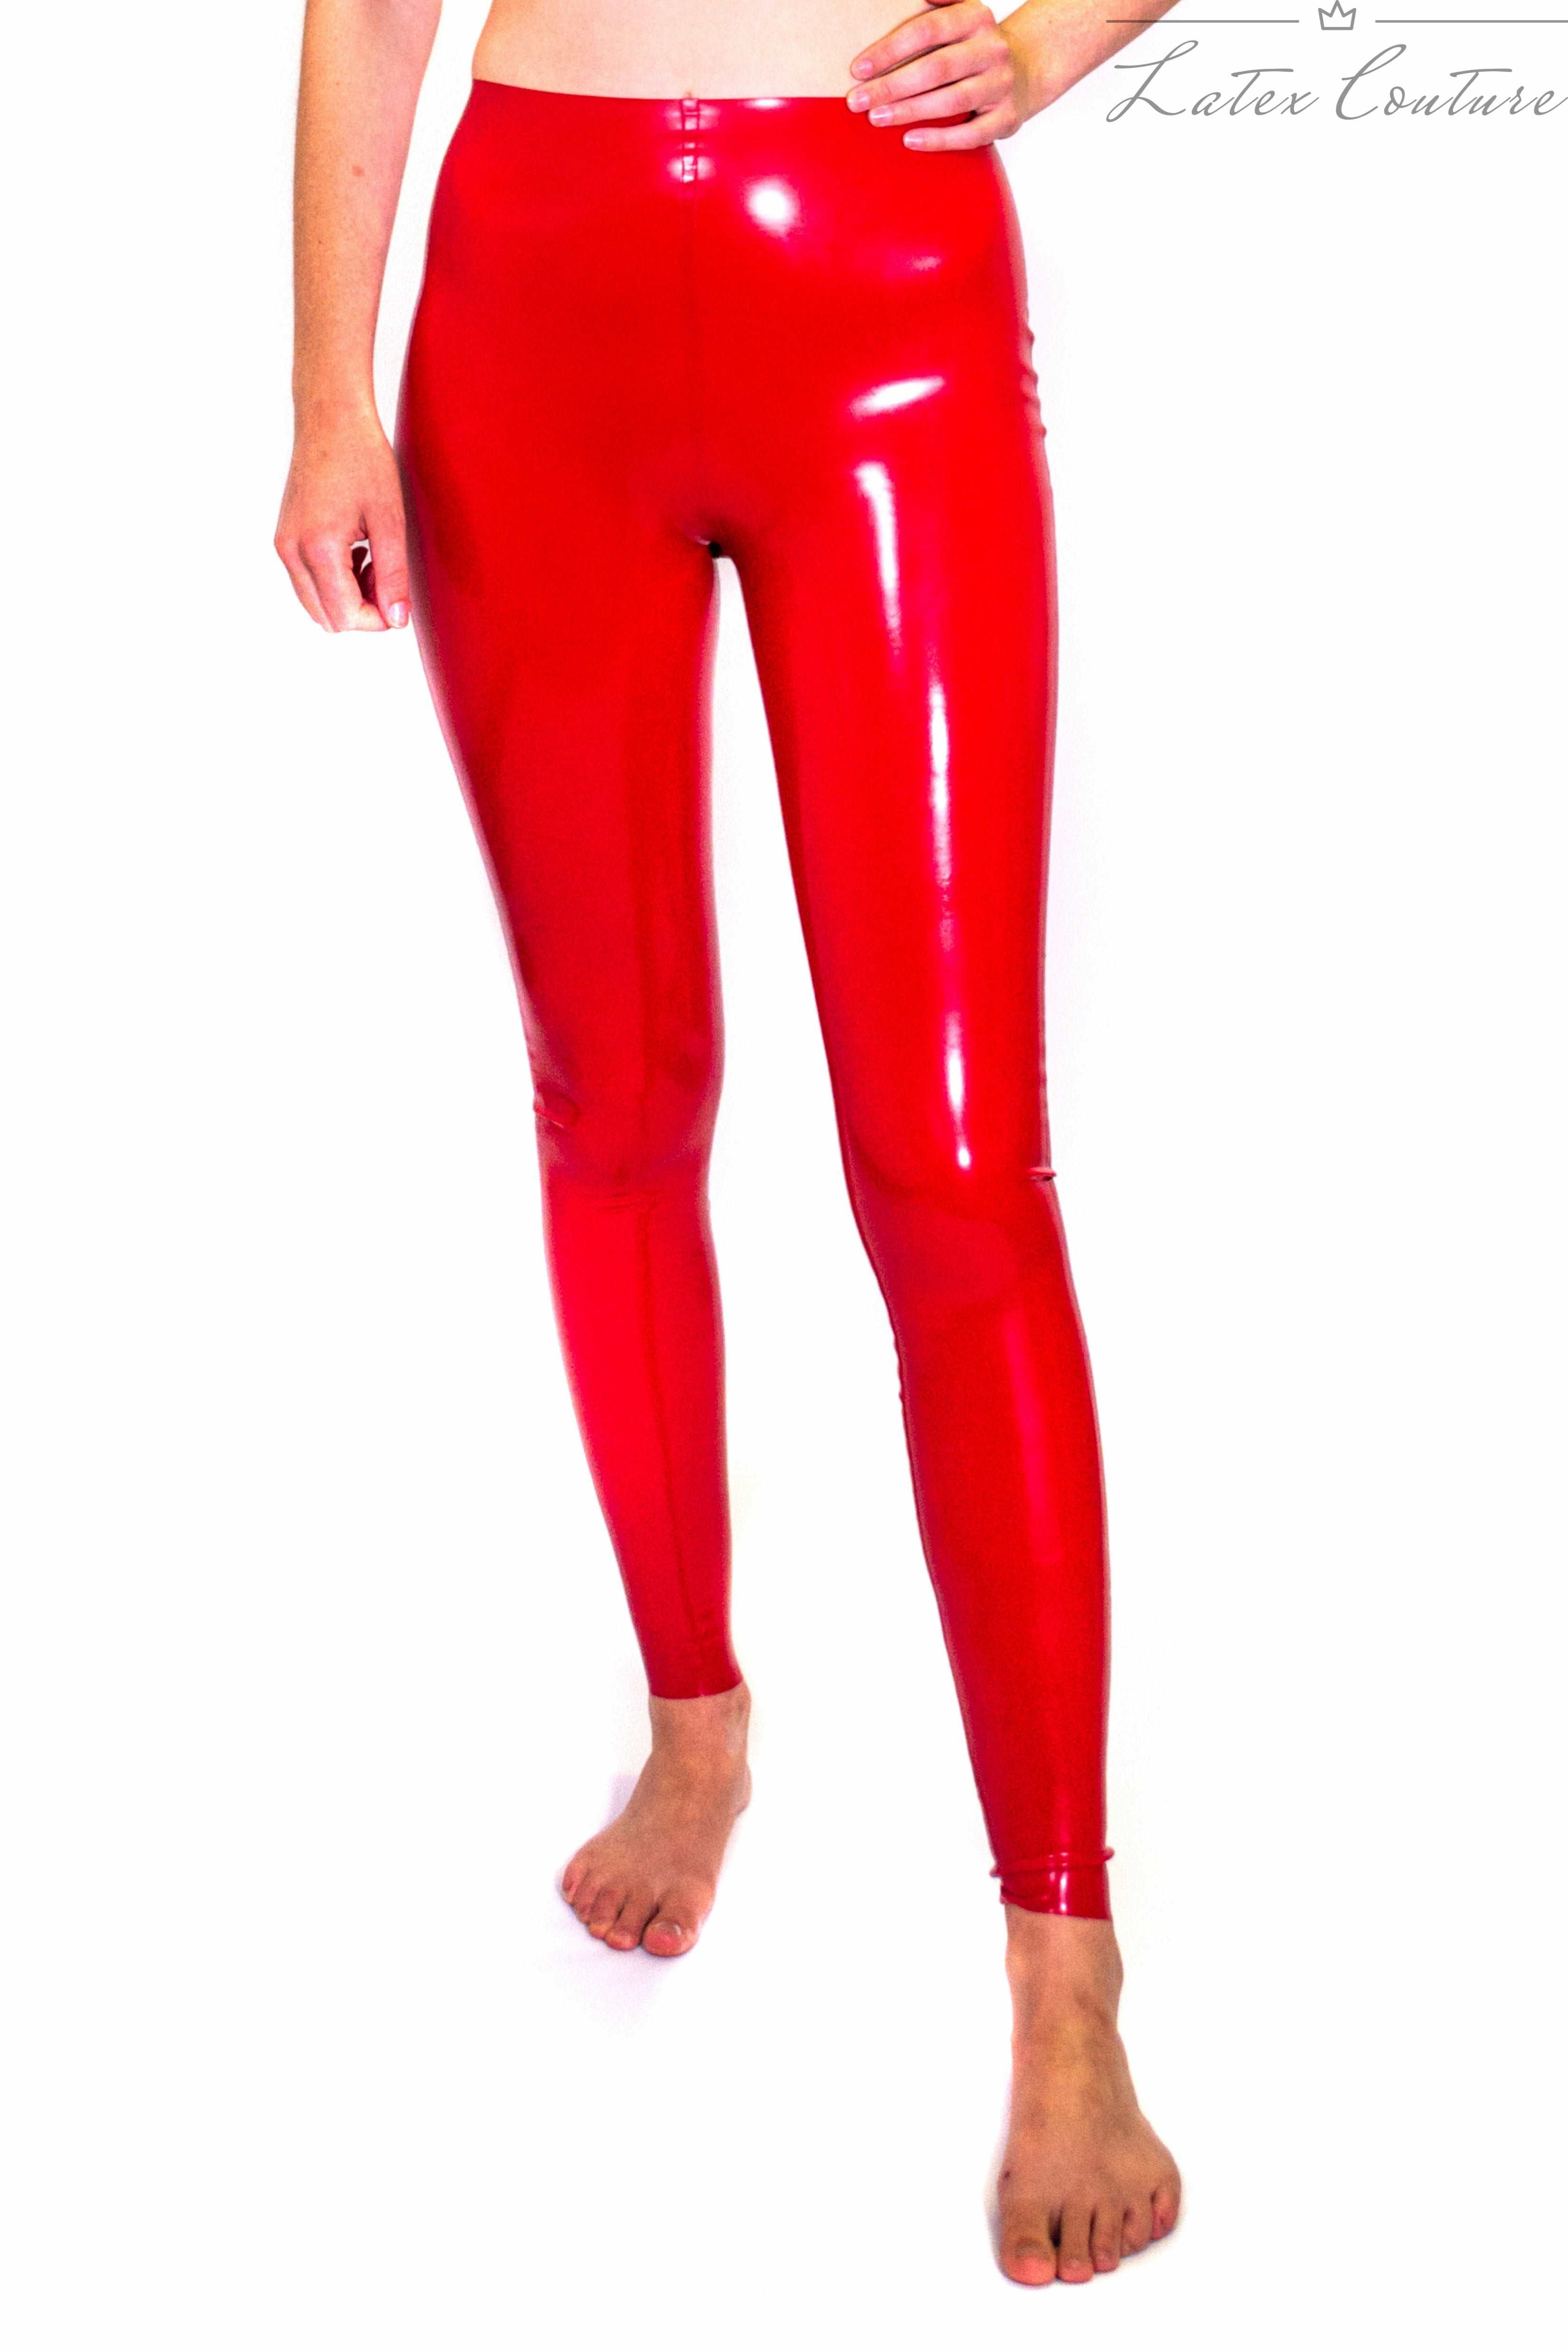 Latex Sport Leggings two coloured with clothsline in the waistband and –  Kirsten Vaams Latex Couture